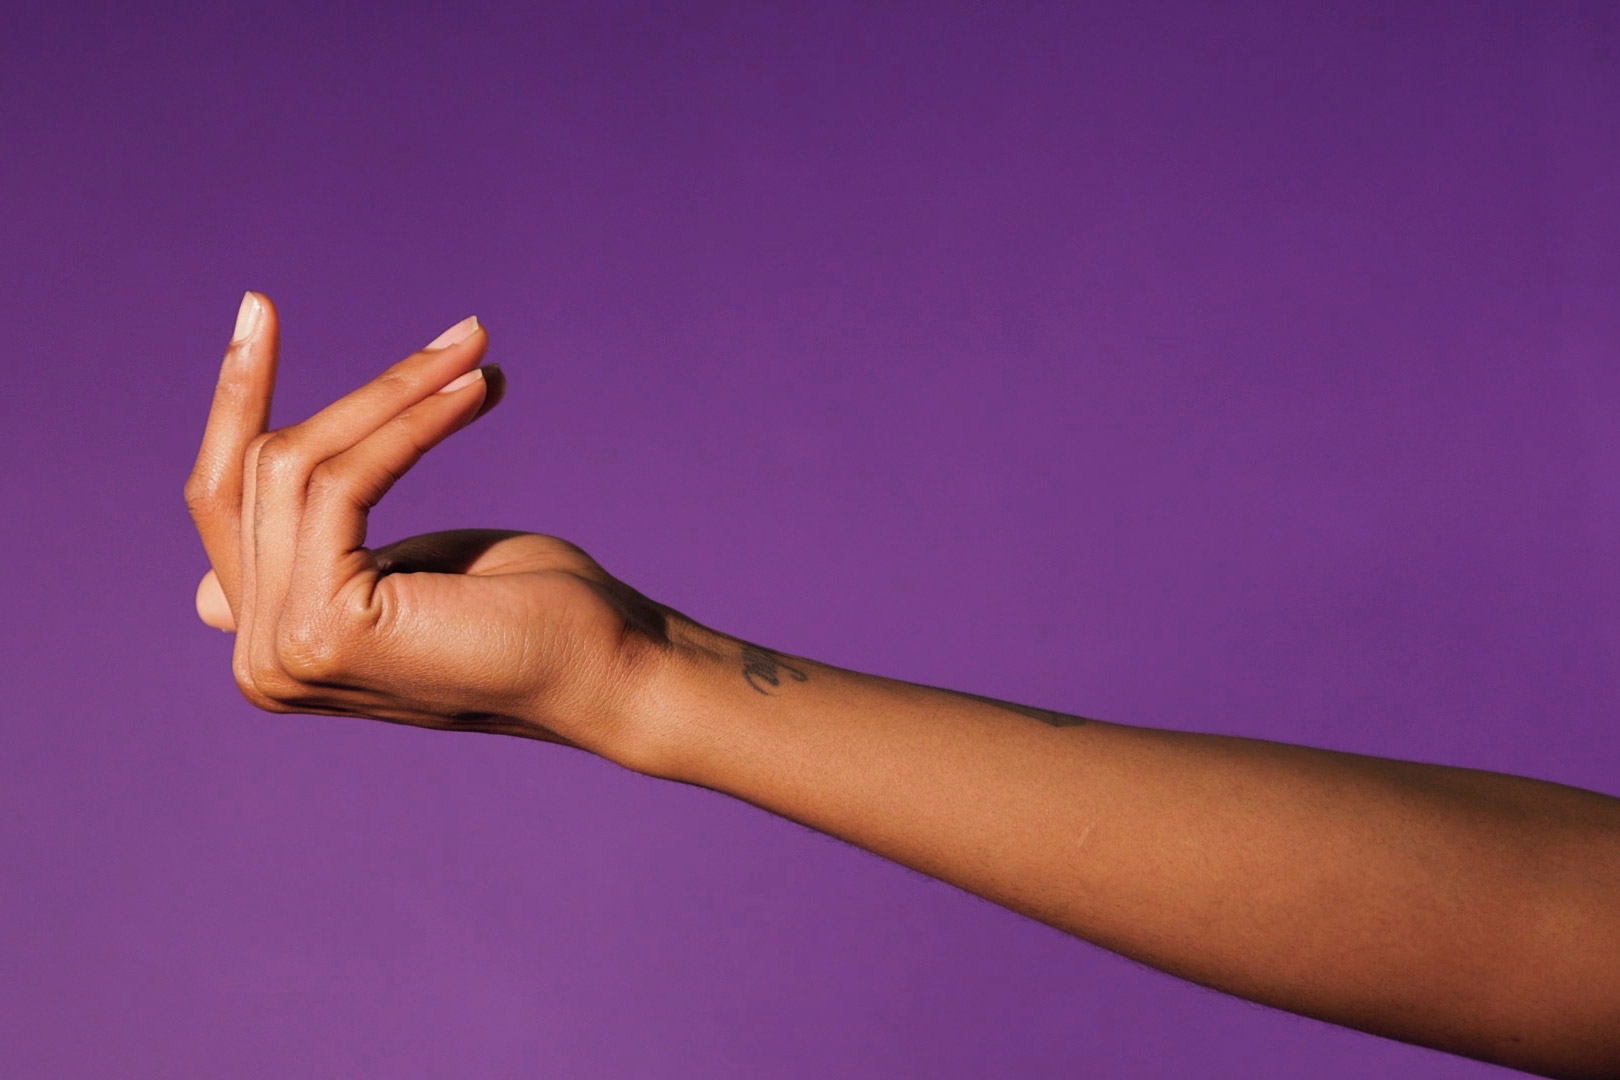 An arm with an illegible tattoo on the wrist reaches across a purple background. 